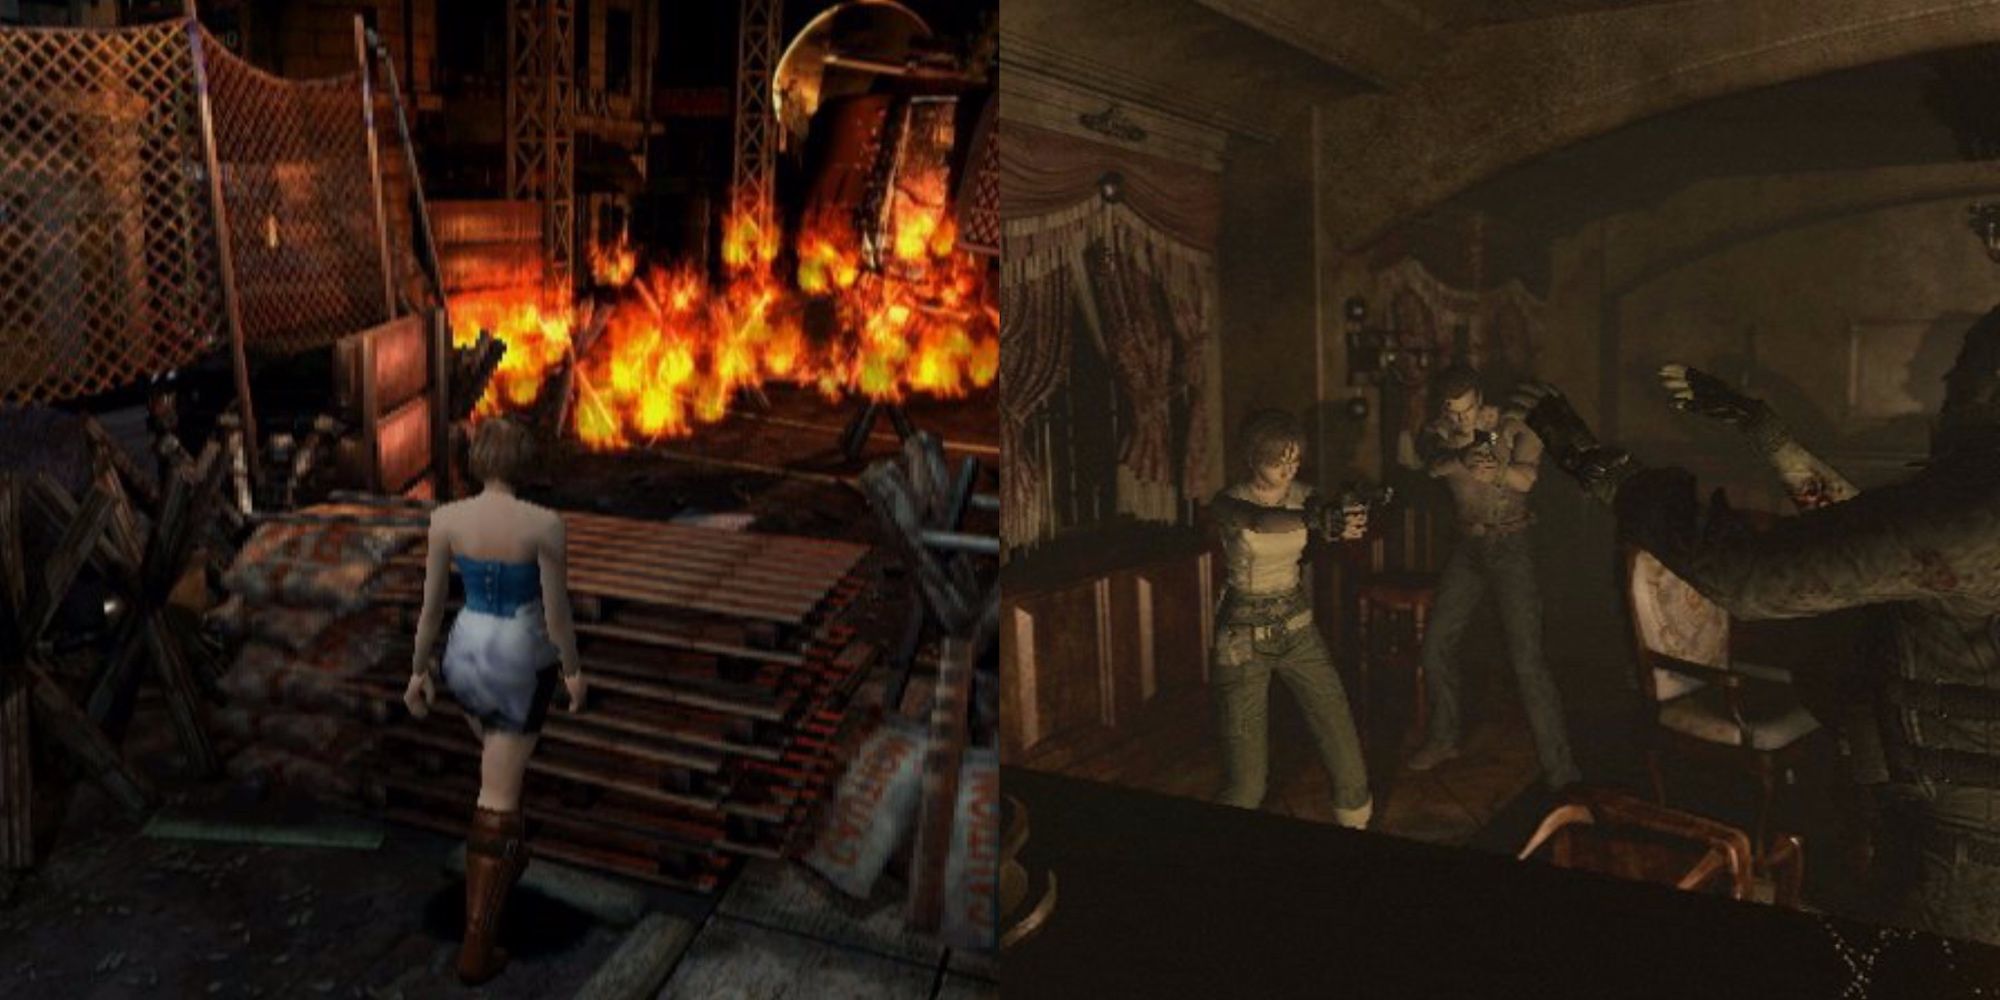 RE 3 on the left, RE Zero on the right